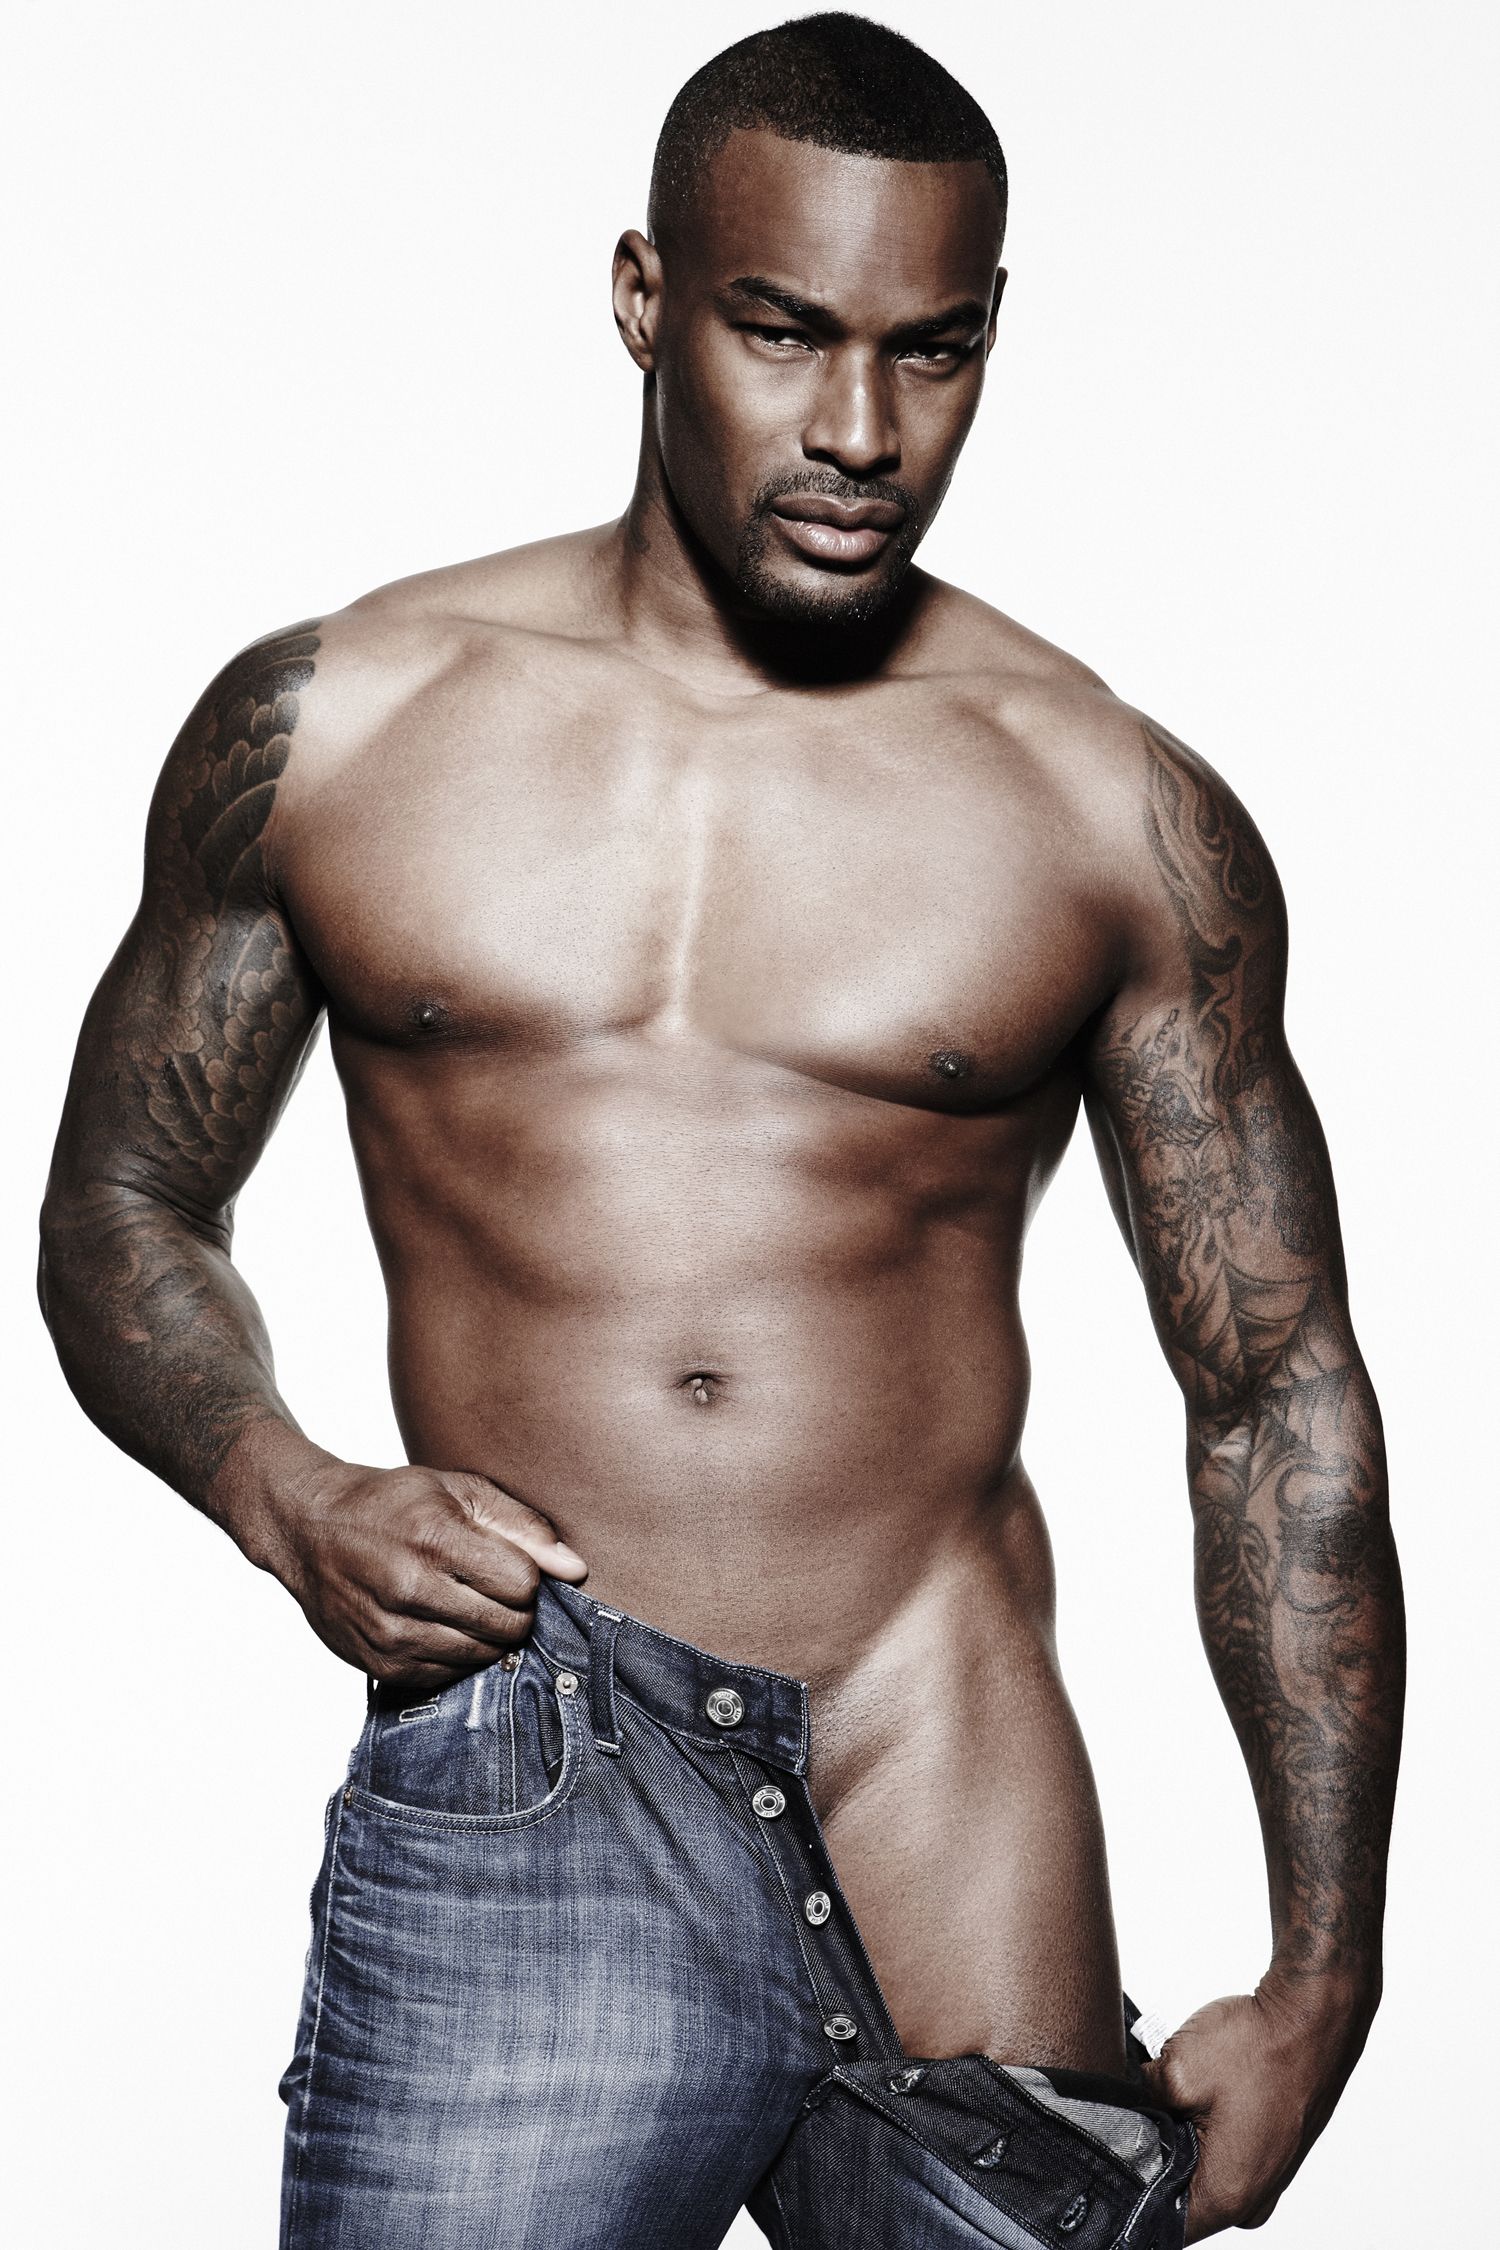 christopher a roach recommends tyson beckford nude pics pic